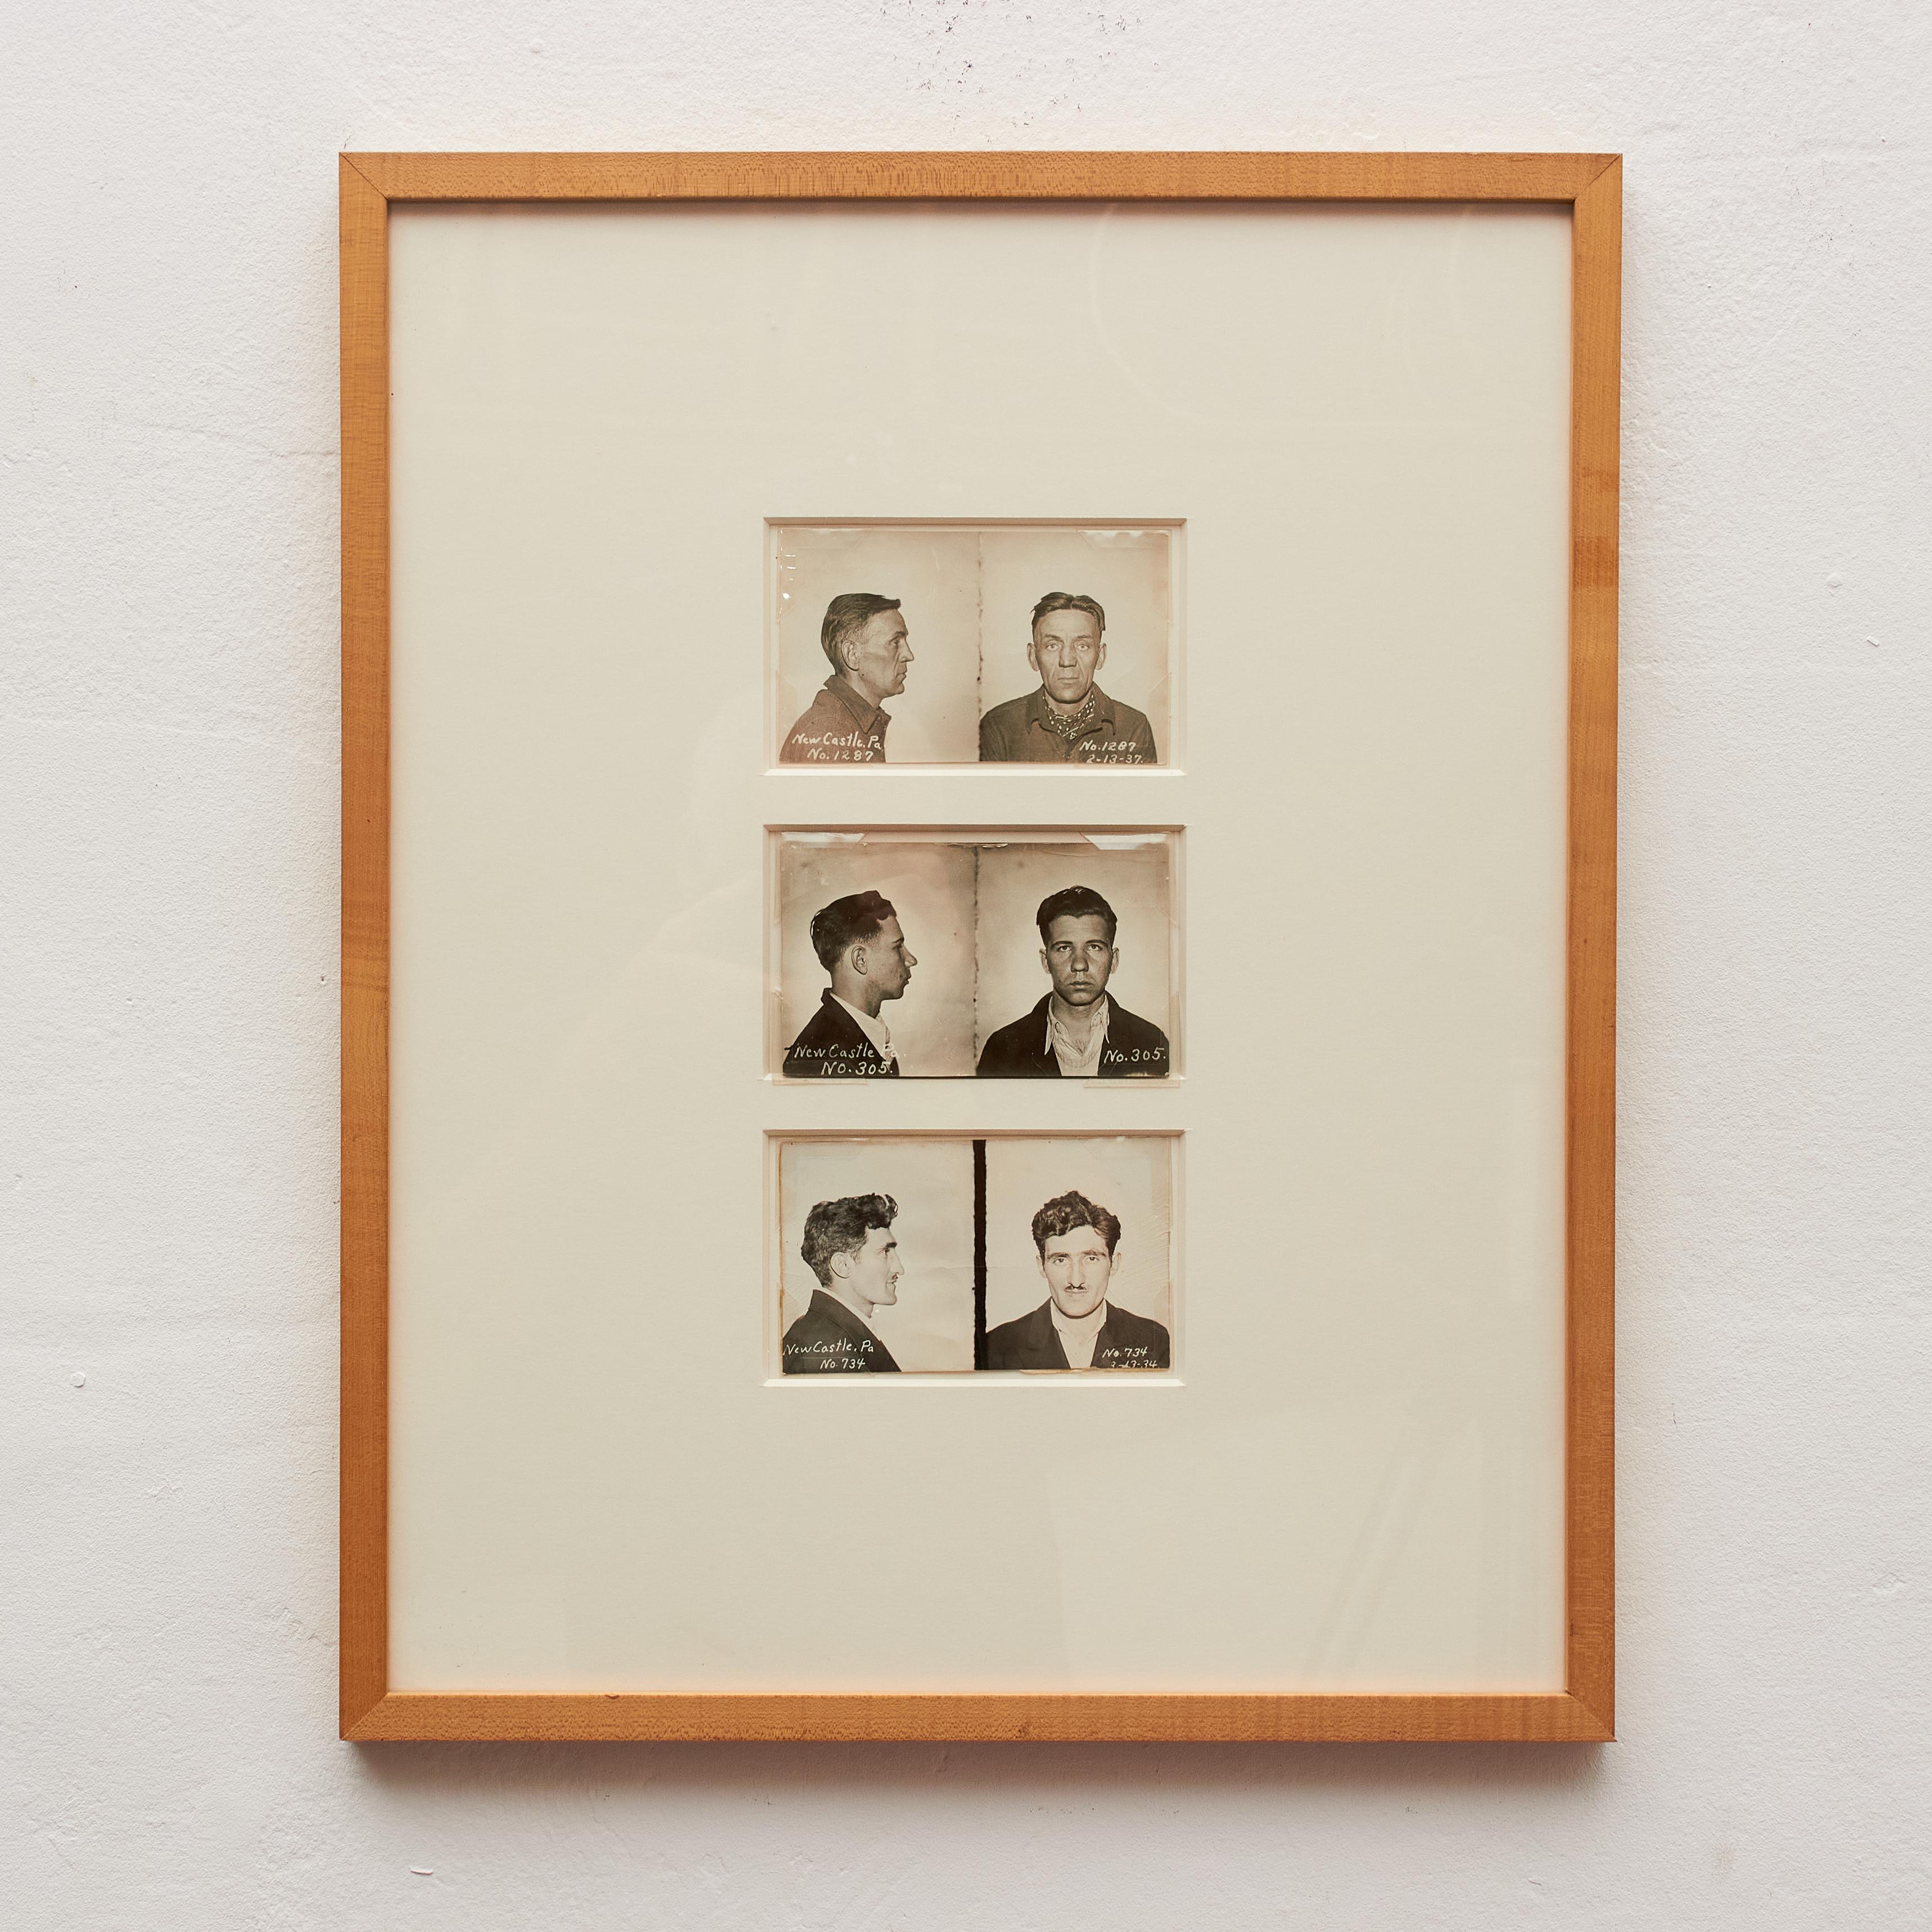 Immerse yourself in a glimpse of history with our unique composition – a trio of original 1930s prisoner photos elegantly framed together in a modern wooden frame. Each photograph tells a story, capturing the expressive faces of individuals in an